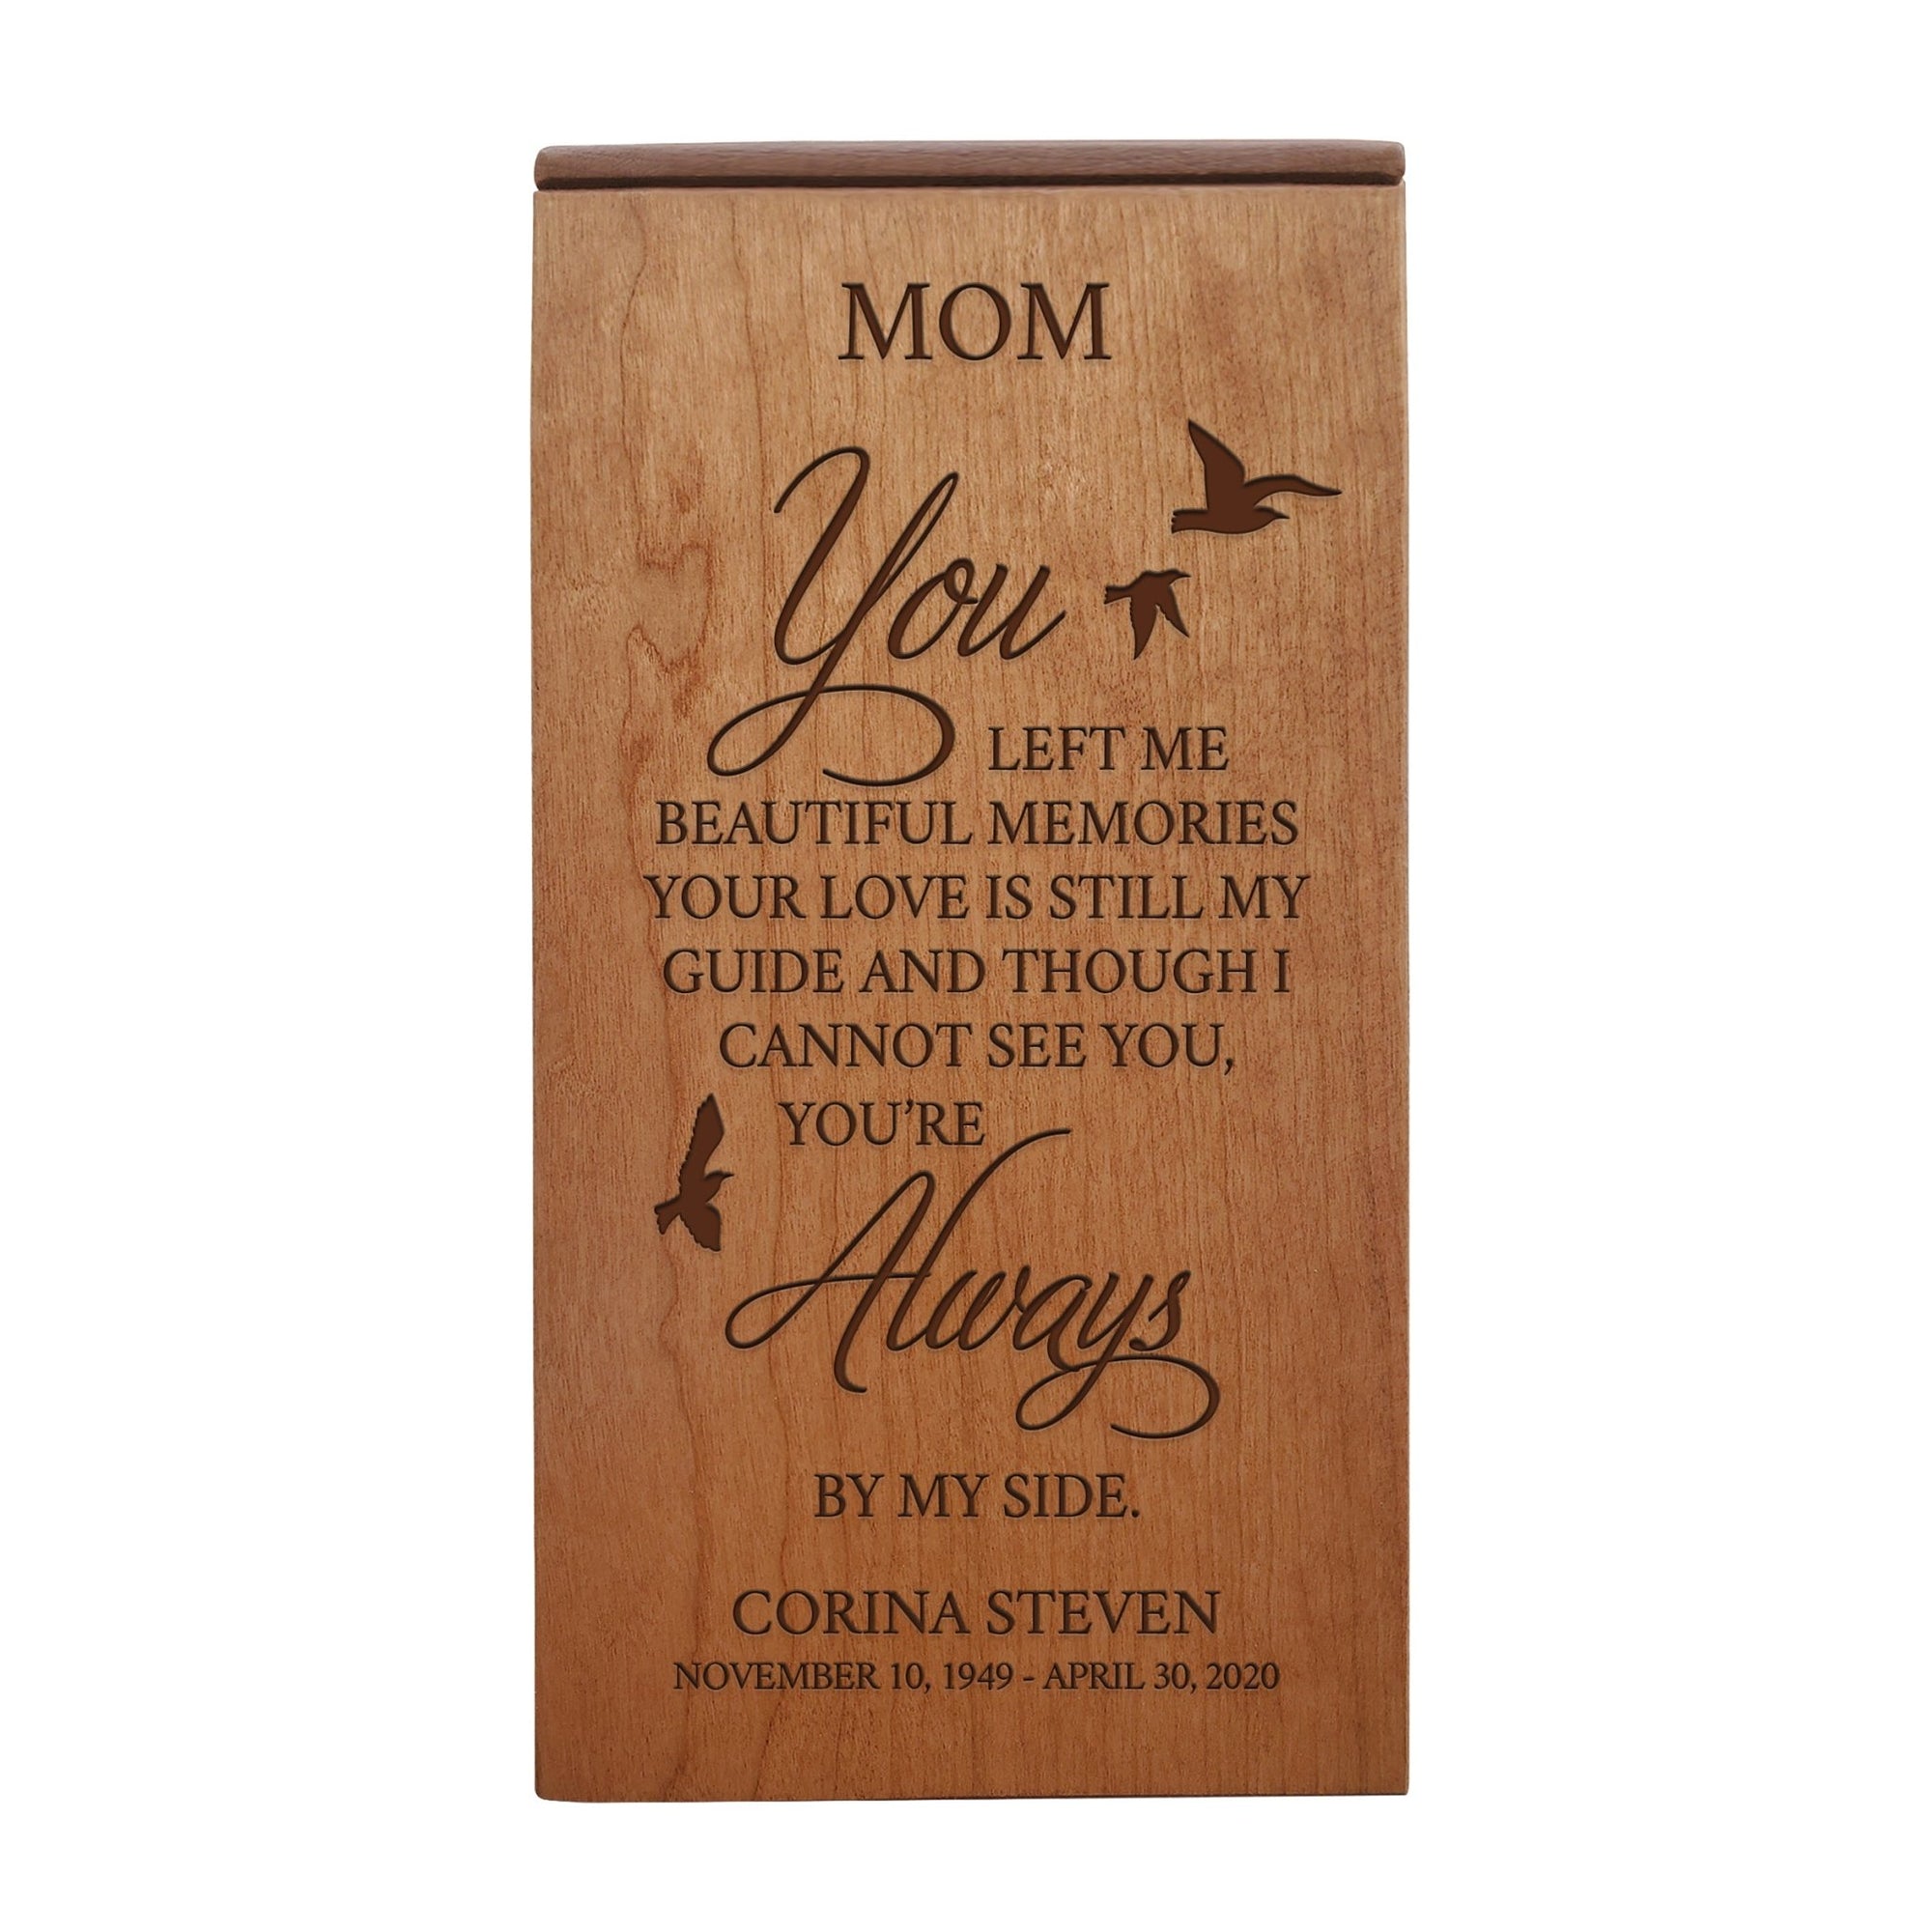 Custom Engraved Memorial Cremation Keepsake Urn Box holds 100 cu in of Ashes in - Mom, You Left Me Beautiful - LifeSong Milestones